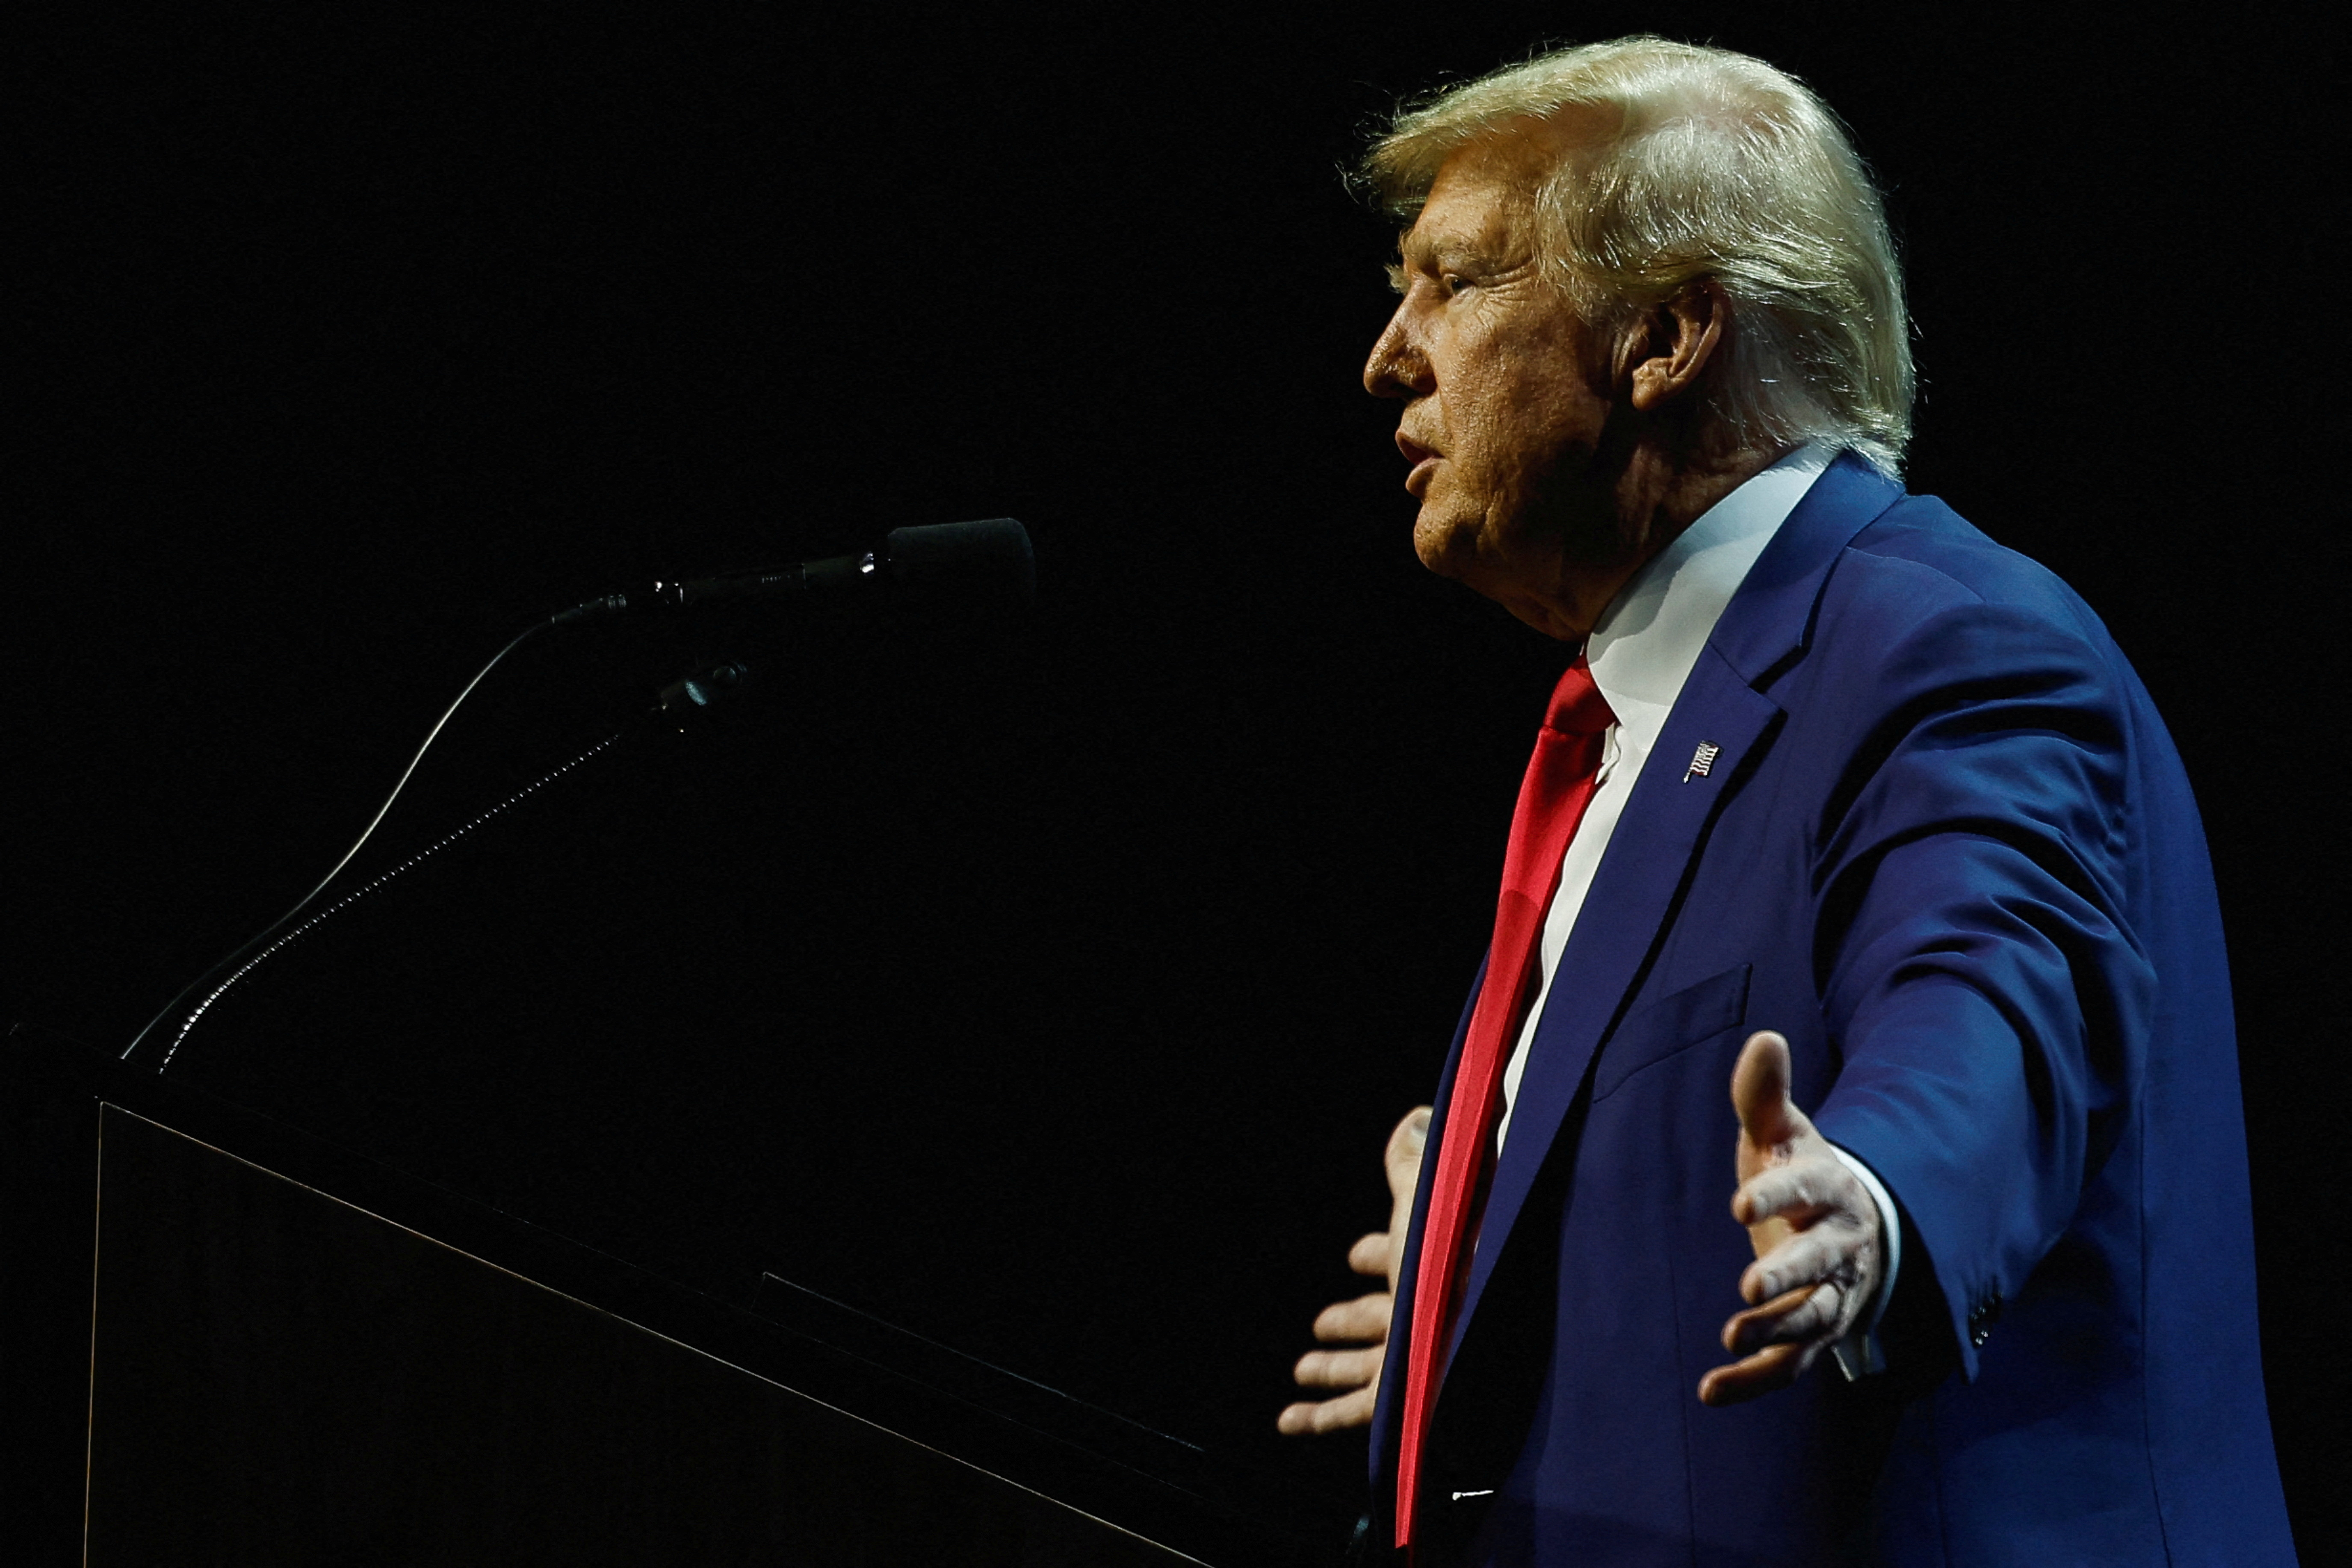 Former U.S. President Donald Trump speaks at the National Rifle Association (NRA) annual convention in Indianapolis